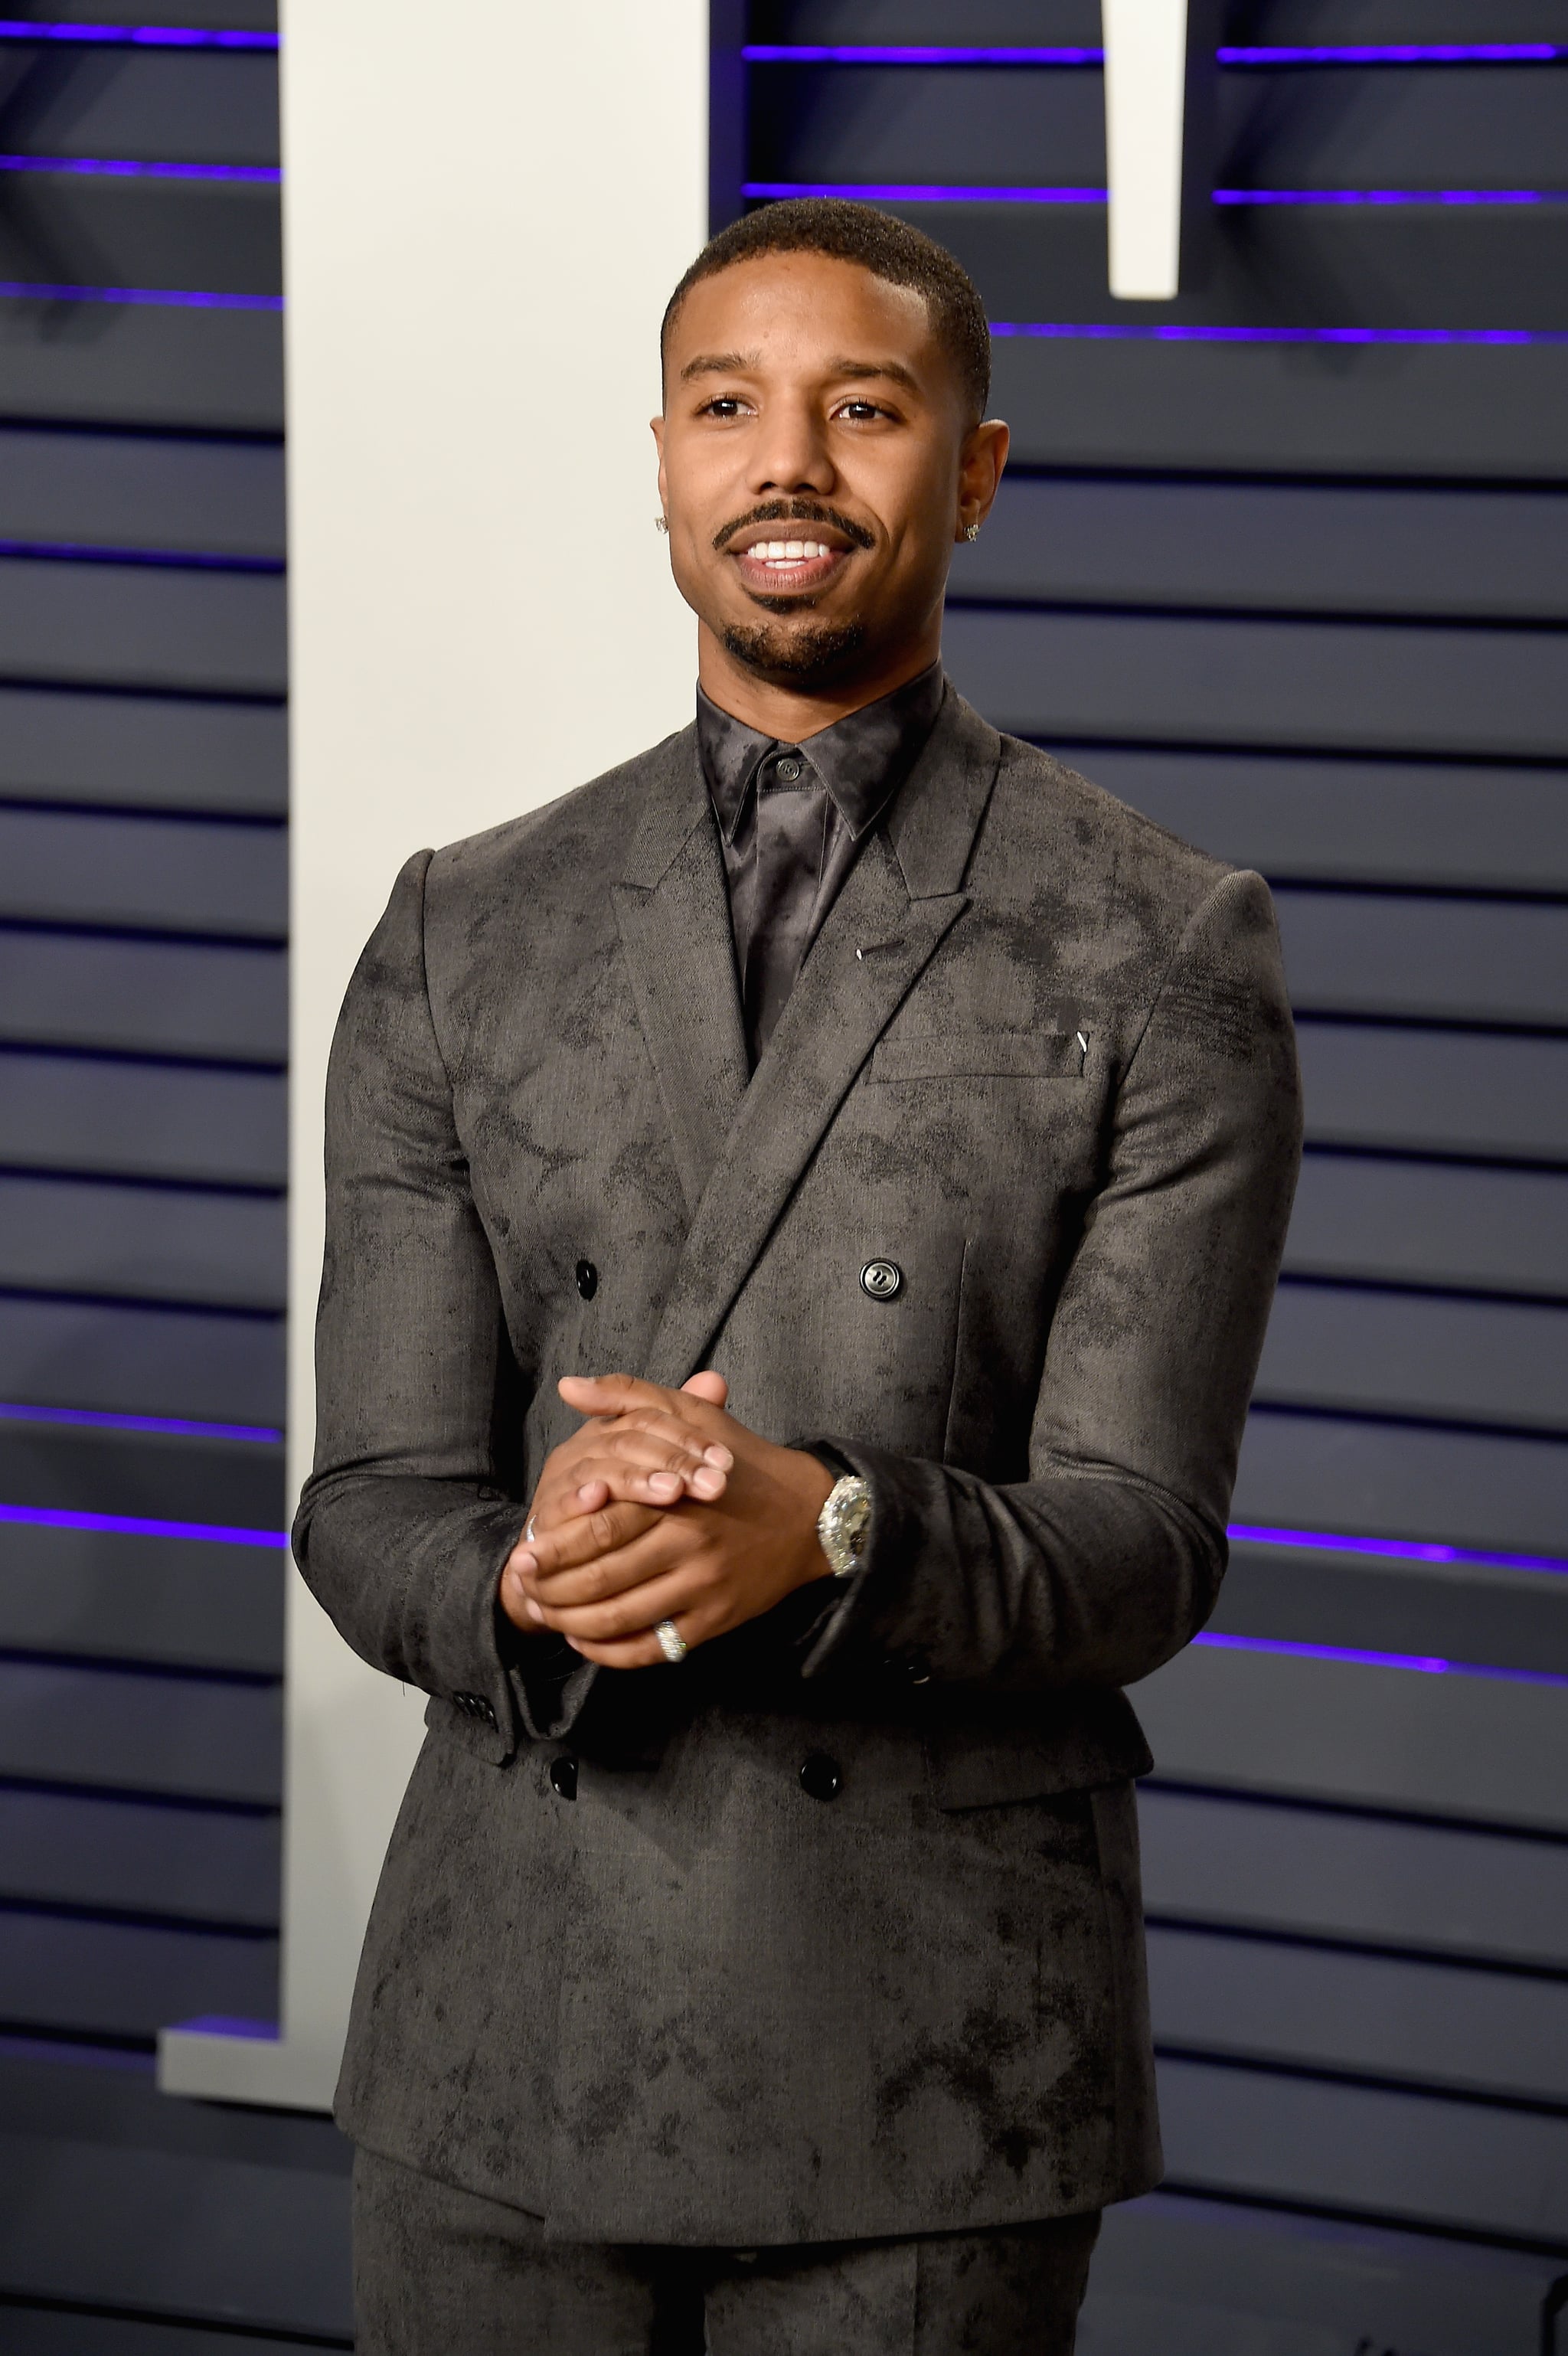 Versace - Michael B Jordan wears a look from the #VersaceCruise20  Collection for his appearance on The Tonight Show. The actor chose a  tailored suit boasting a pinstripe pattern enriched with subtle